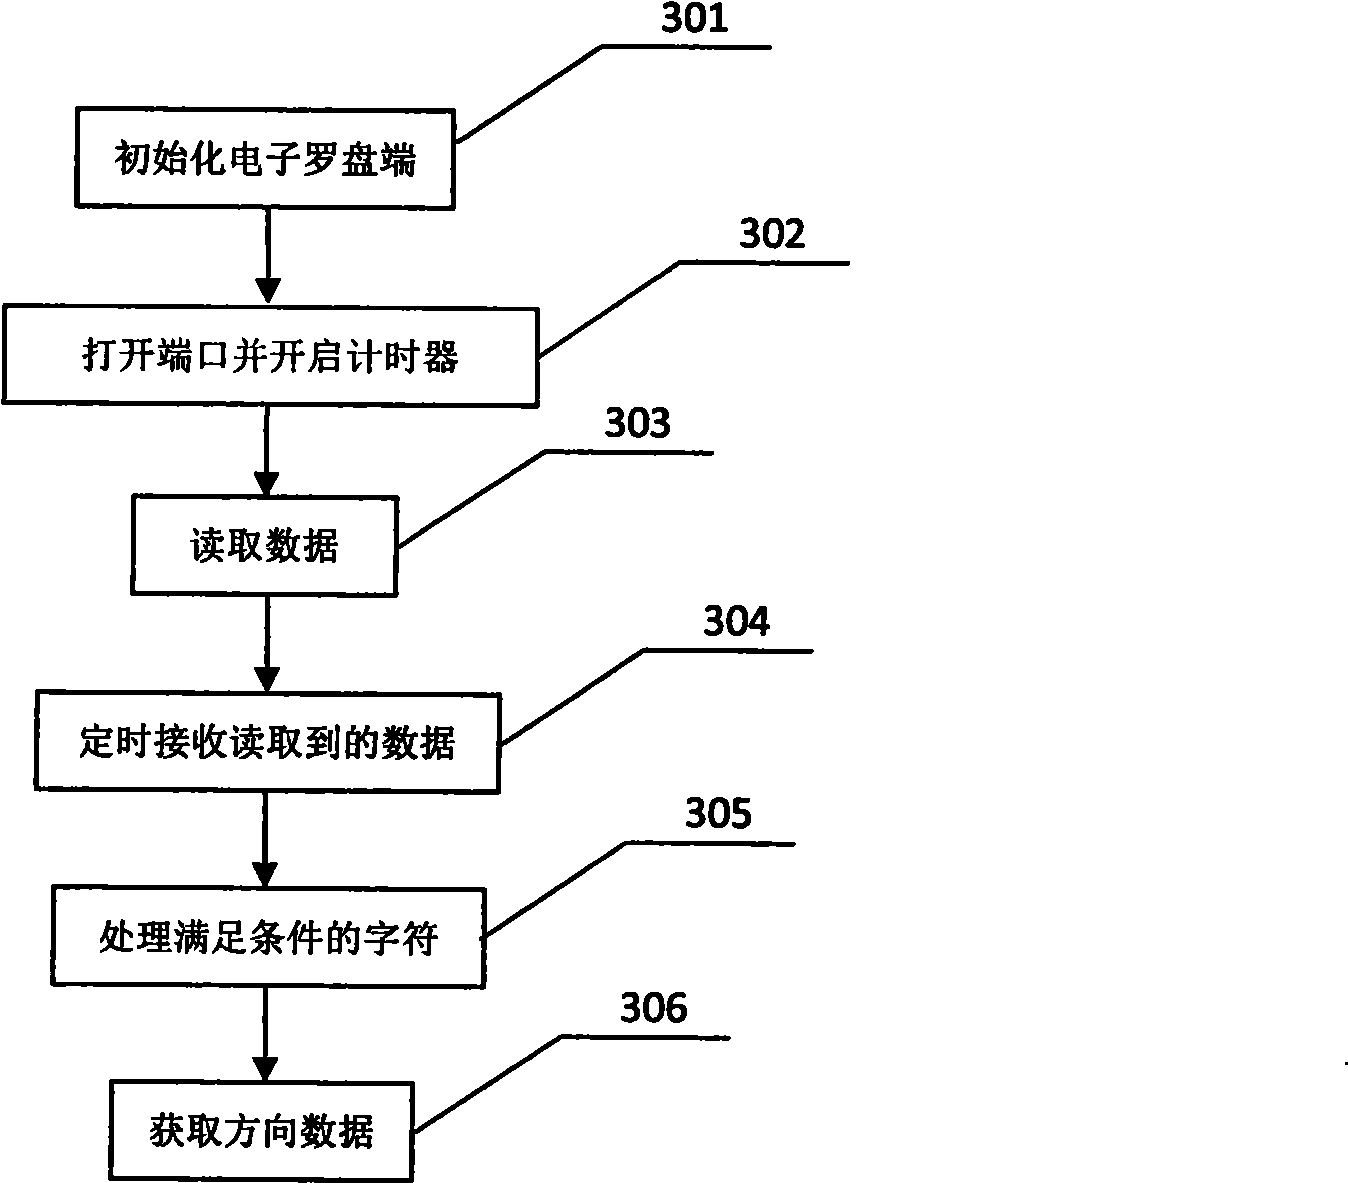 System and method for implementing intelligent mobile phone enhancement based on three-dimensional electronic compass